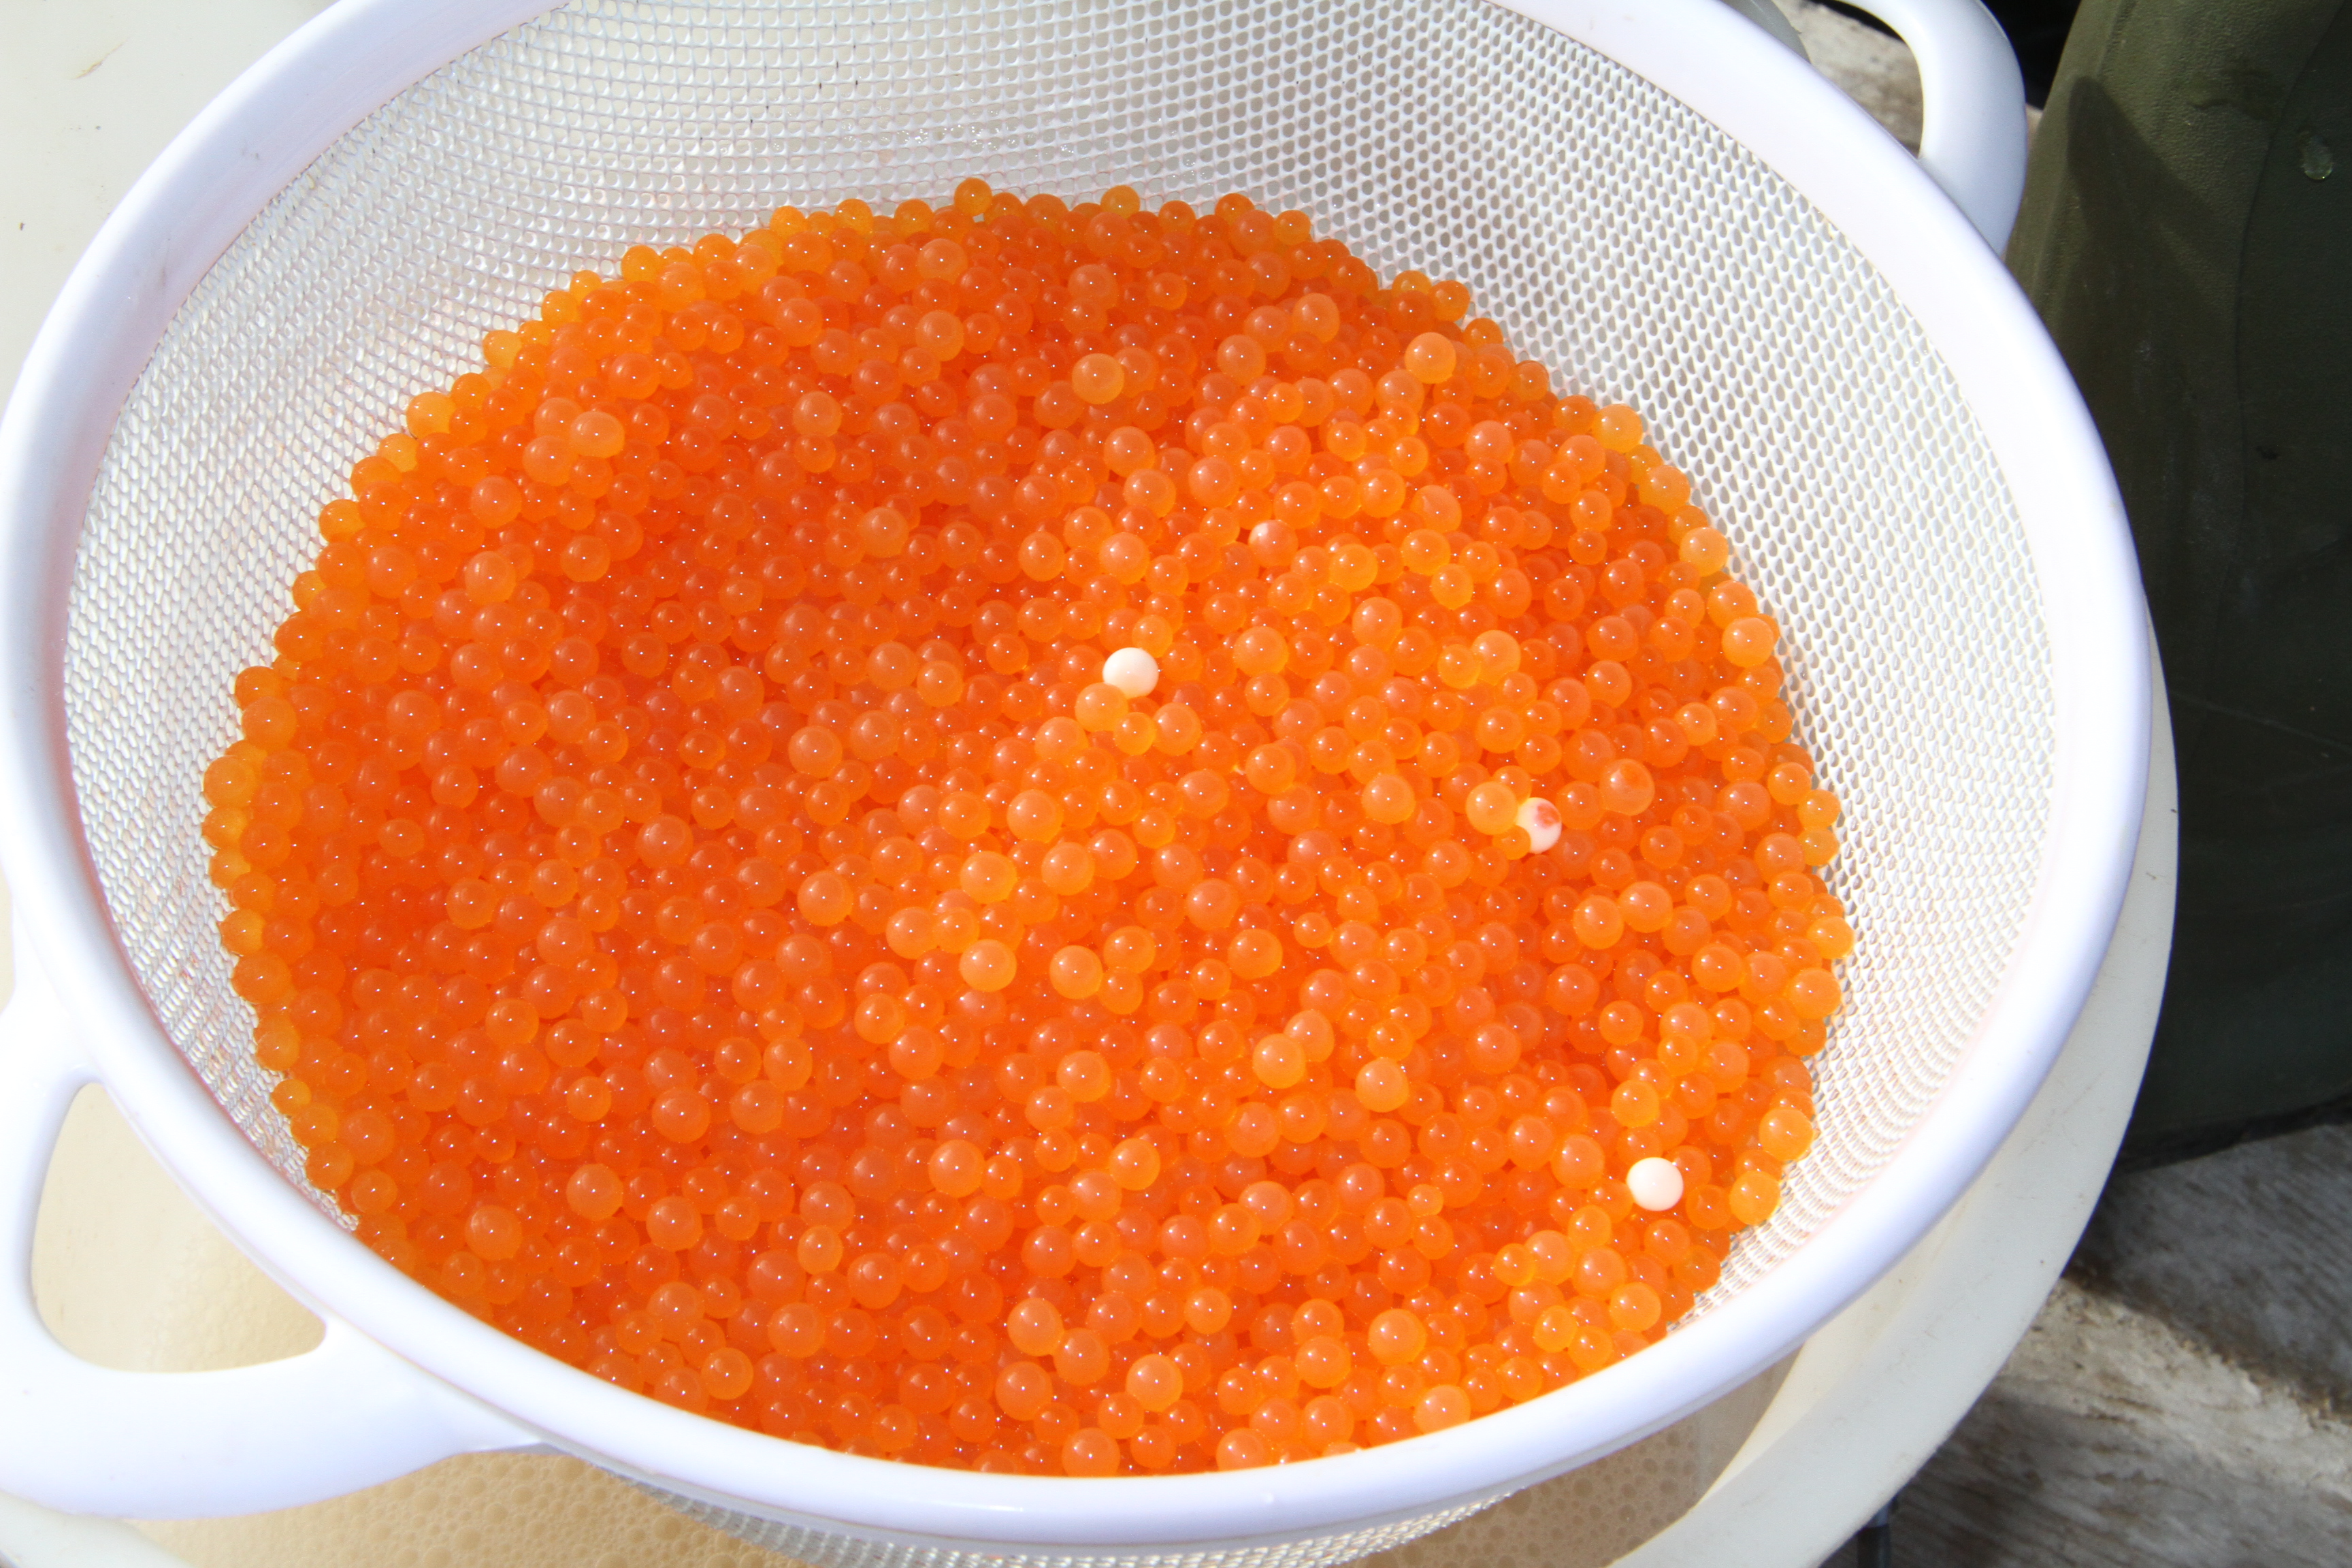 A bowl full of fertilized salmon eggs. The white eggs are "dead" eggs that will be removed before they are brought to the hatchery.